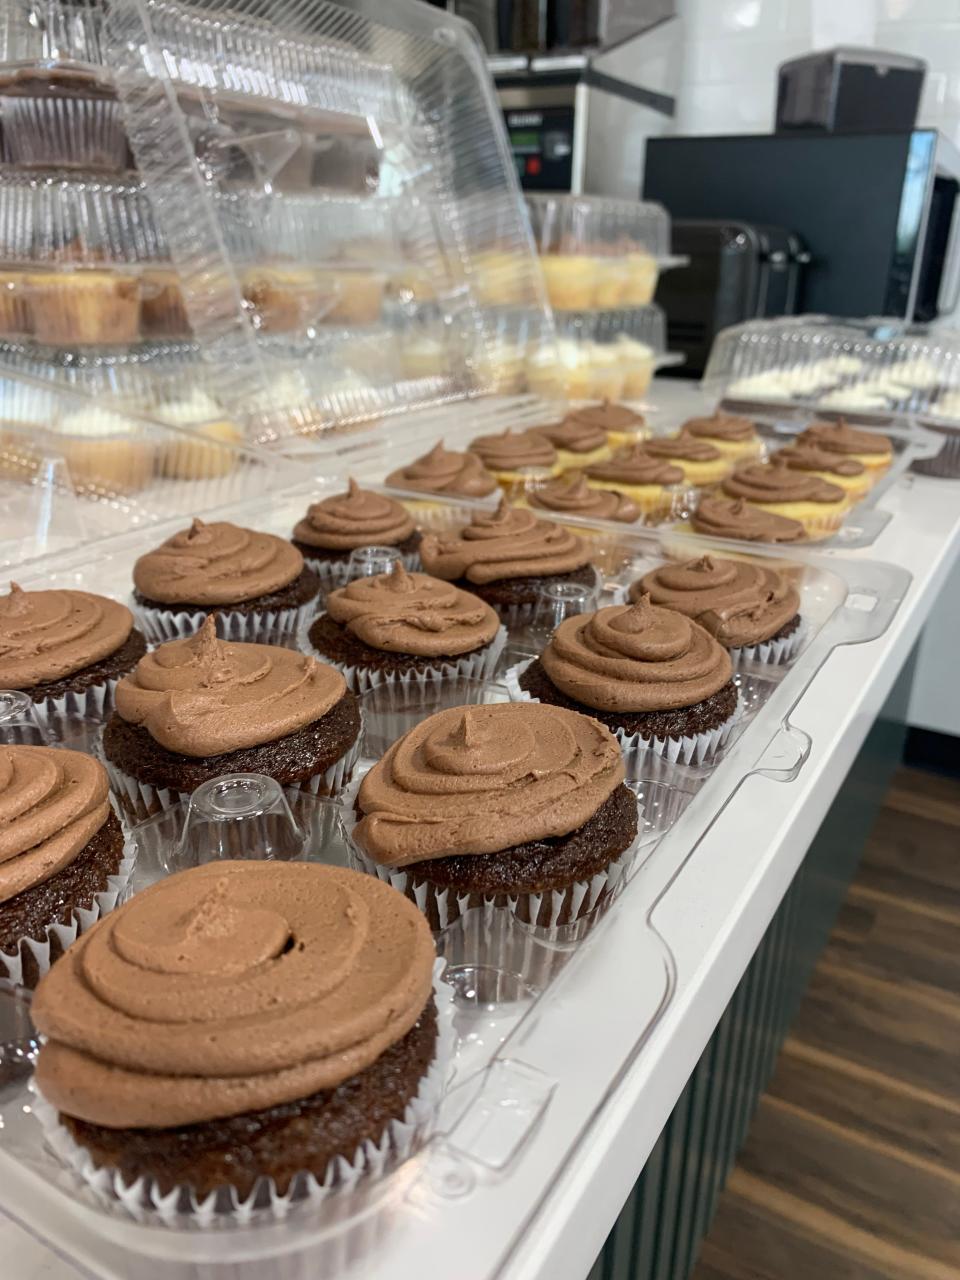 Several dozens of gluten-free cupcakes are made by recent Dalton High School graduate Aubrey Geiser. Geiser said this was one of her first big orders she made through her baking company Aubey's Bakery.